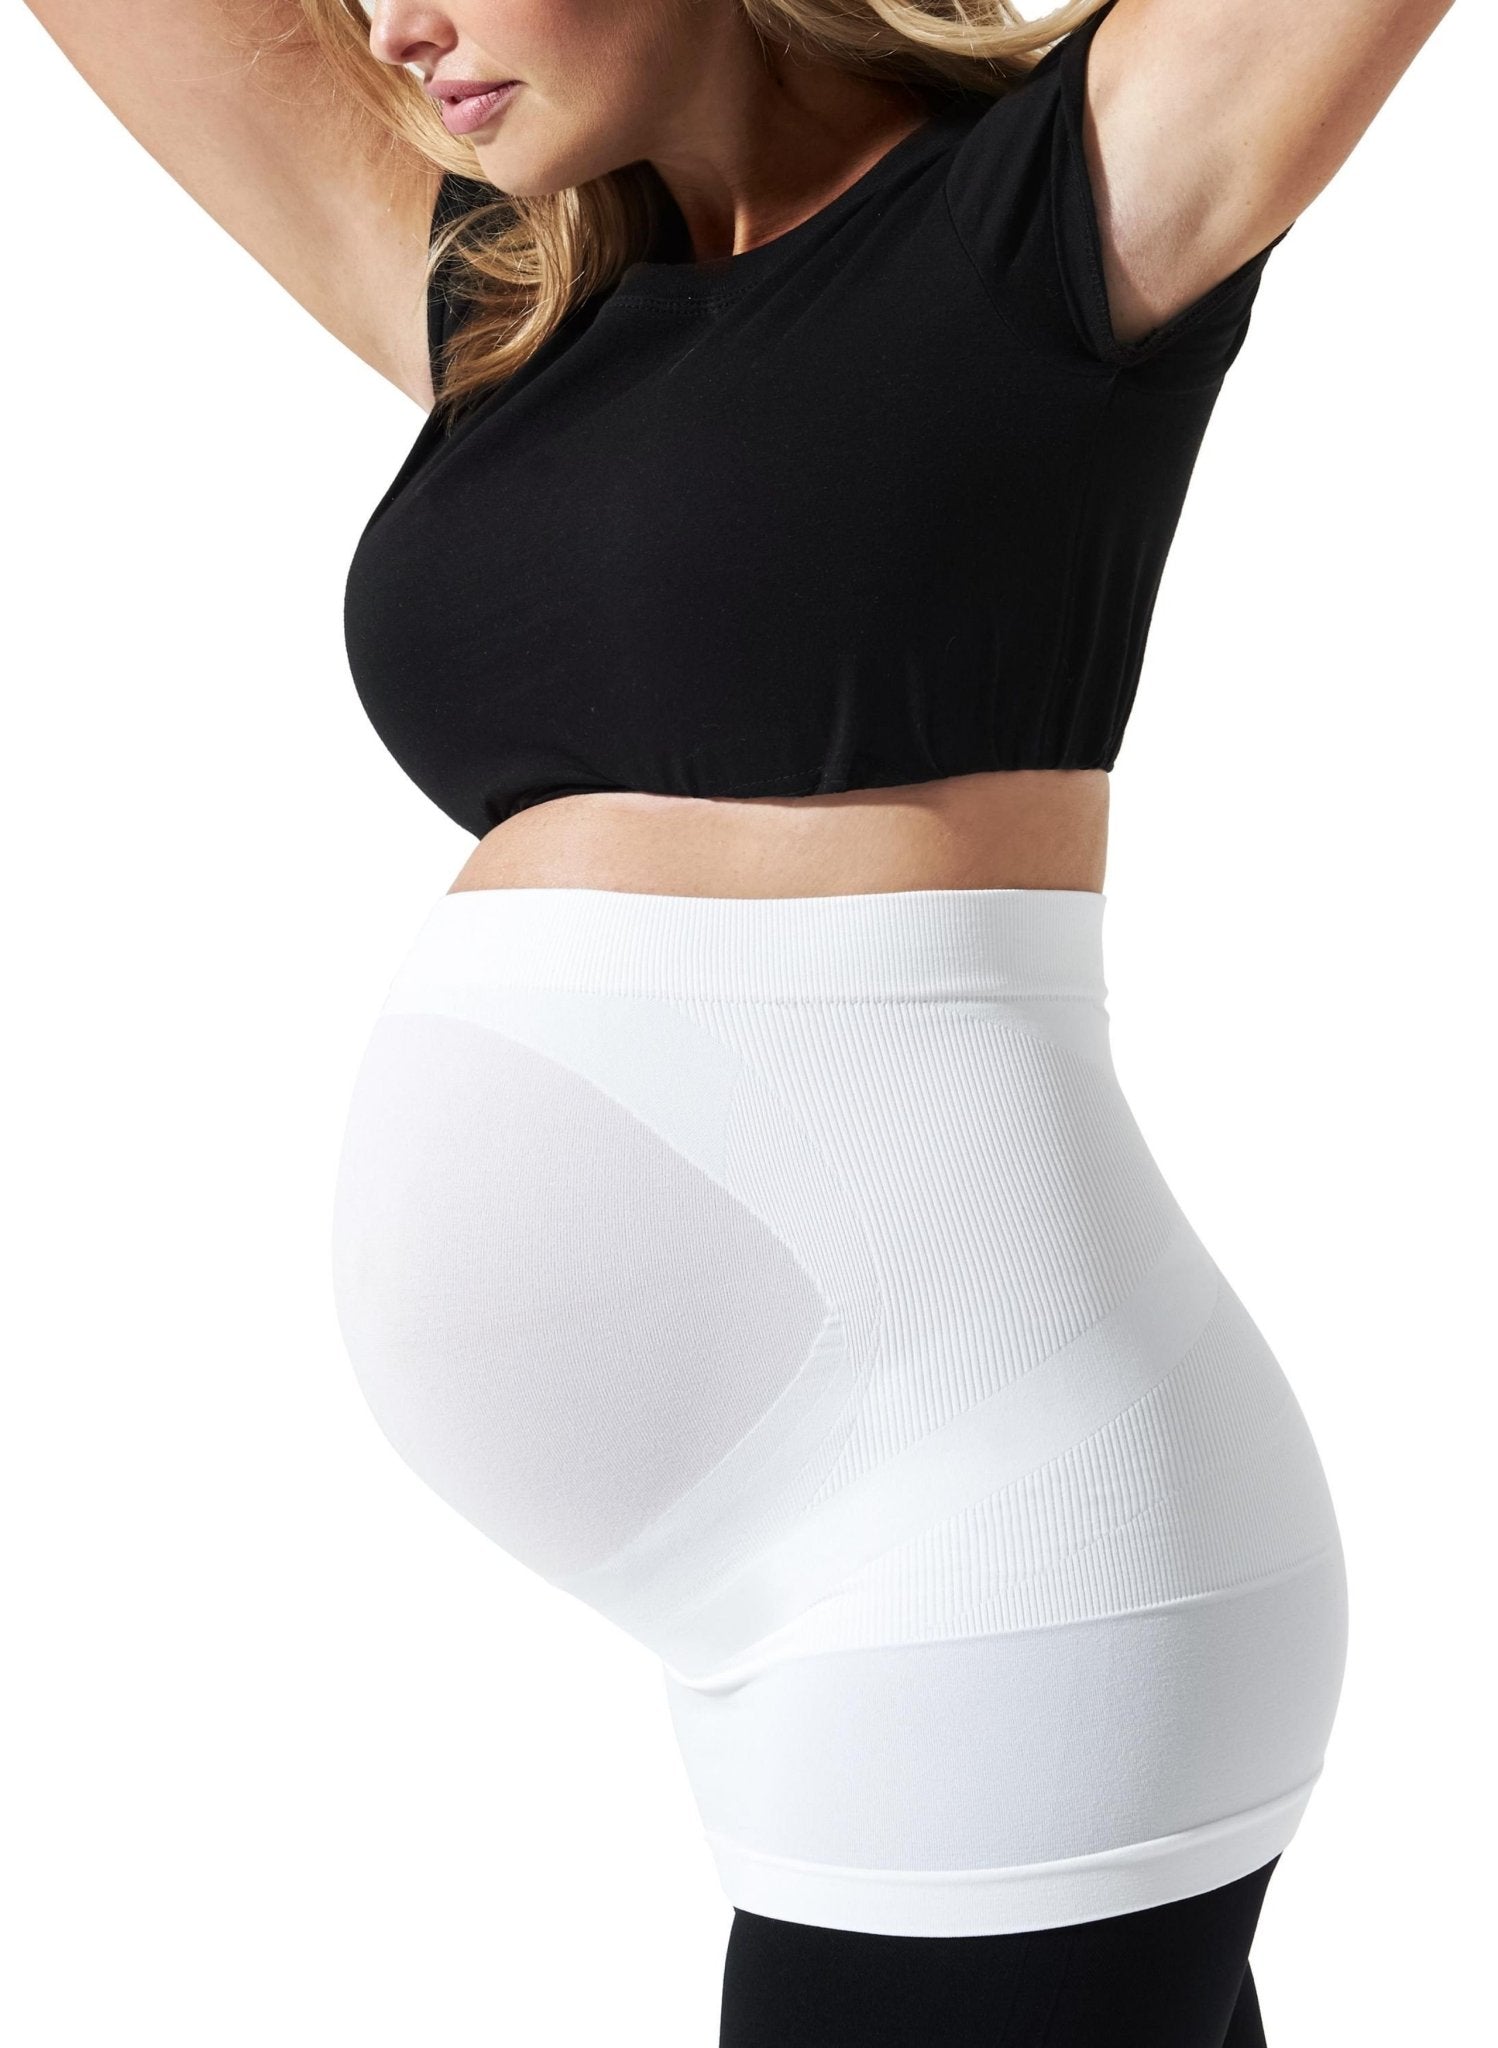 BLANQI Maternity Built-in Support Bellyband - White - Mums and Bumps